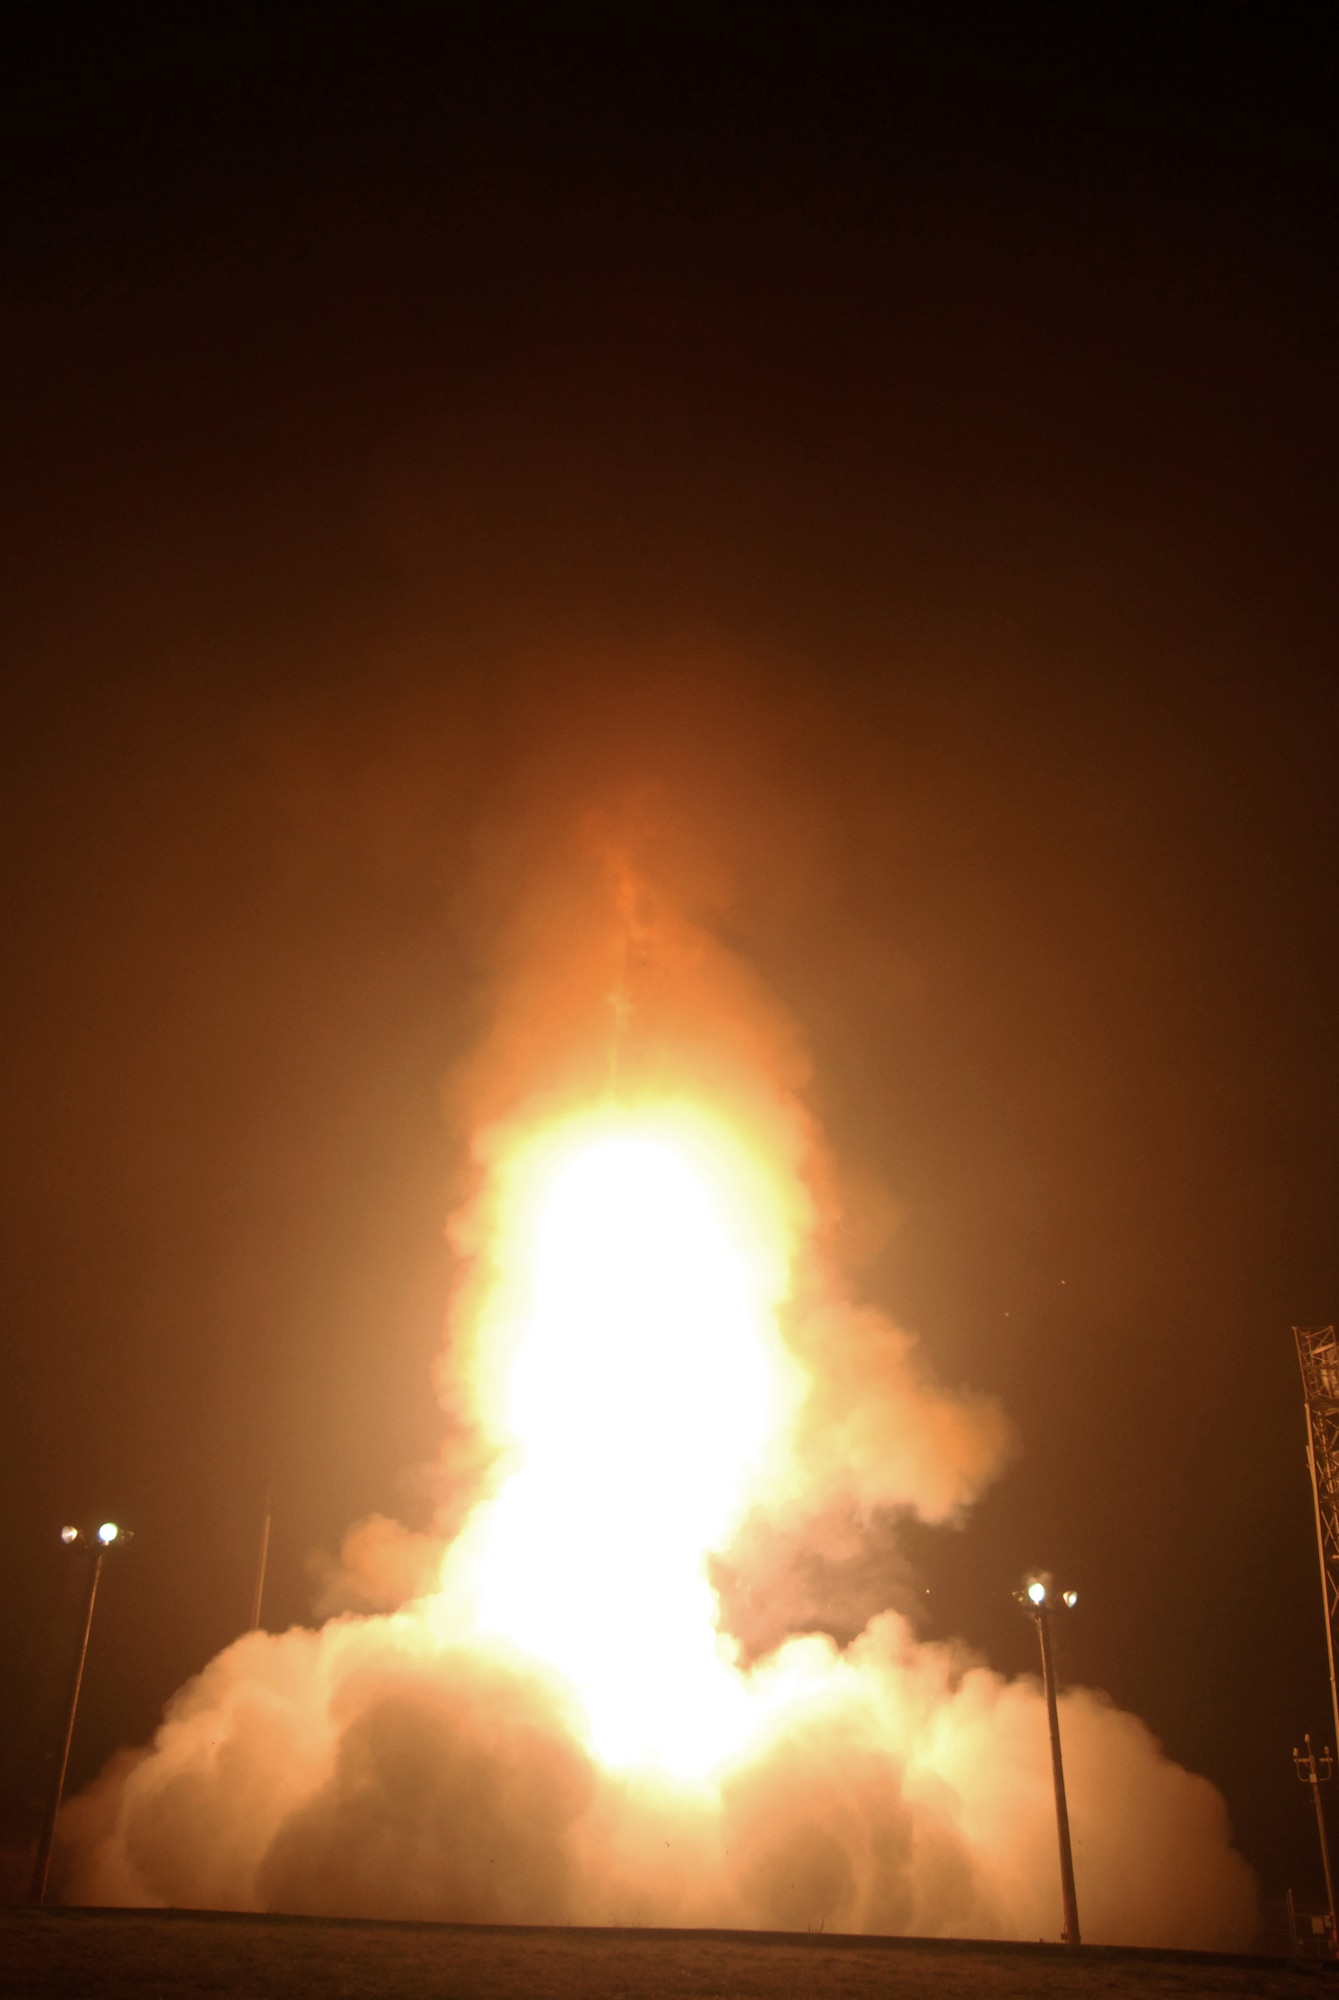 VANDENBERG AIR FORCE BASE, Calif. -- A modified Minuteman II booster vehicle with a simplified target payload lifts off at 1:31 a.m. on Aug 23 from North Vandenberg. The launch was part of an exercise involving the tracking of a long-range target missile by the Near Field Infrared Experiment research satellite. (U.S. Air Force photo/Joe Davila)